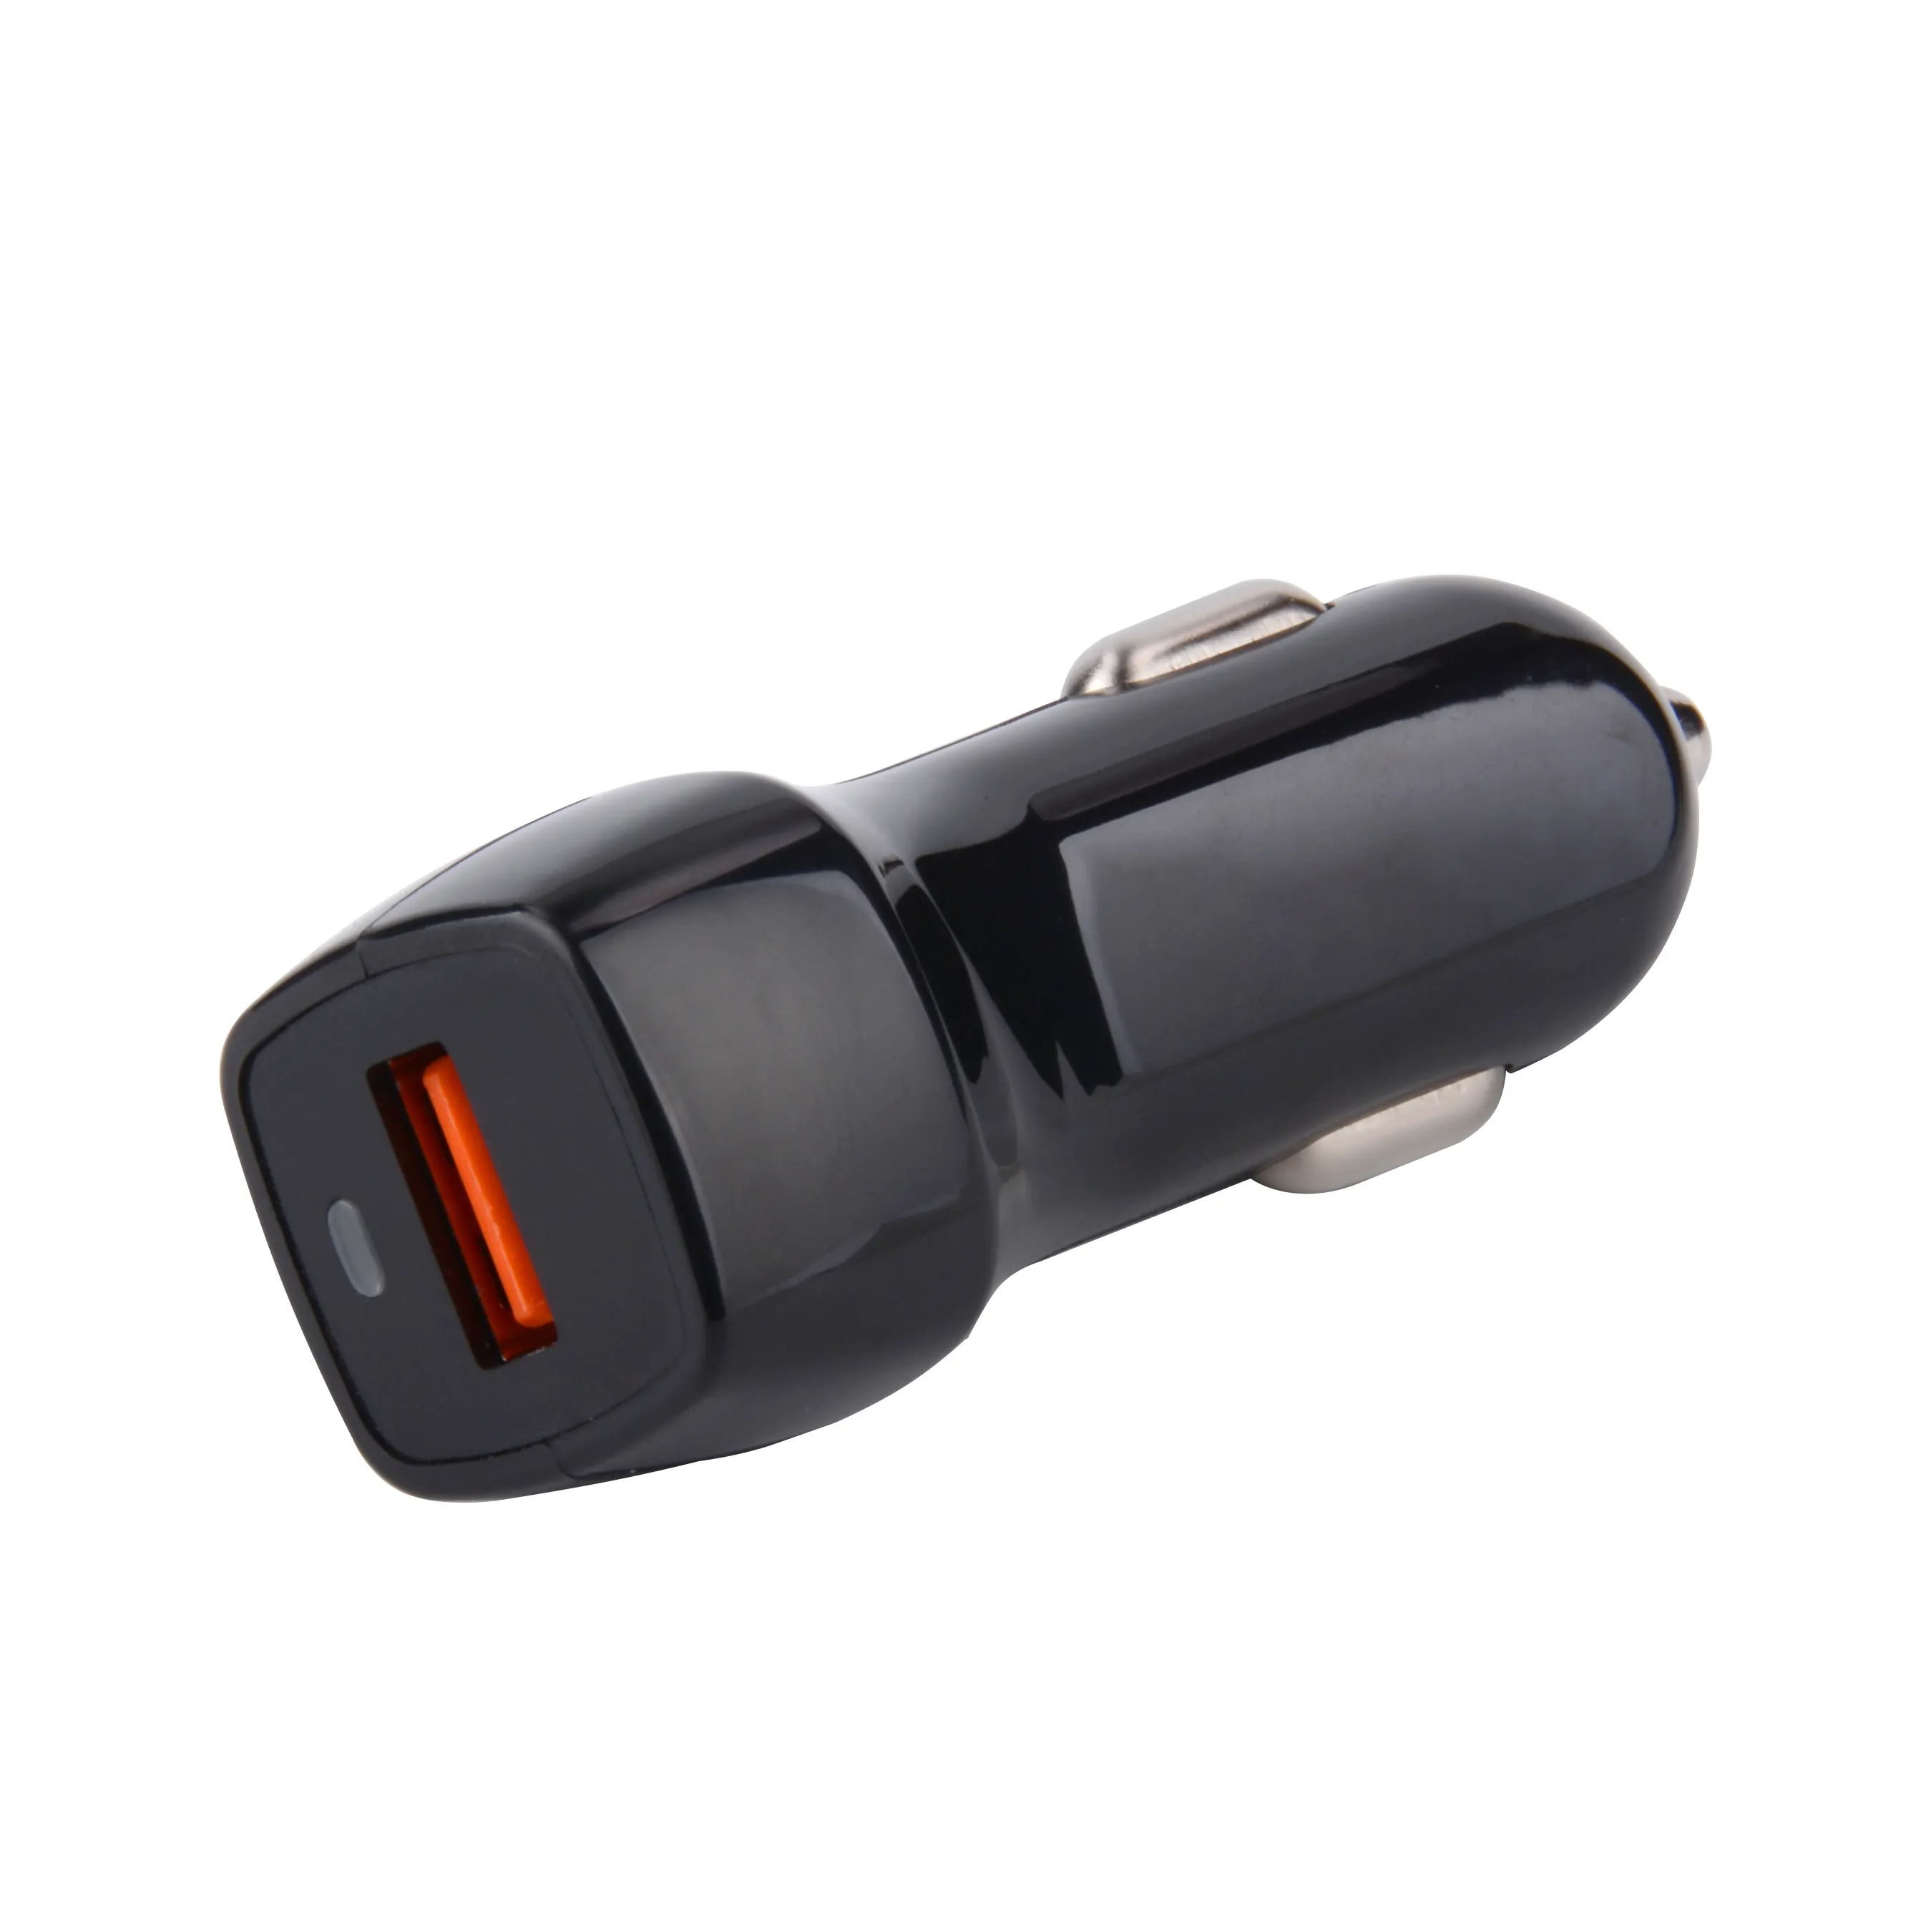 Car Charger Phone Usb Assesories For Mobile Phone And Cable Phone Charger Holder For Cars